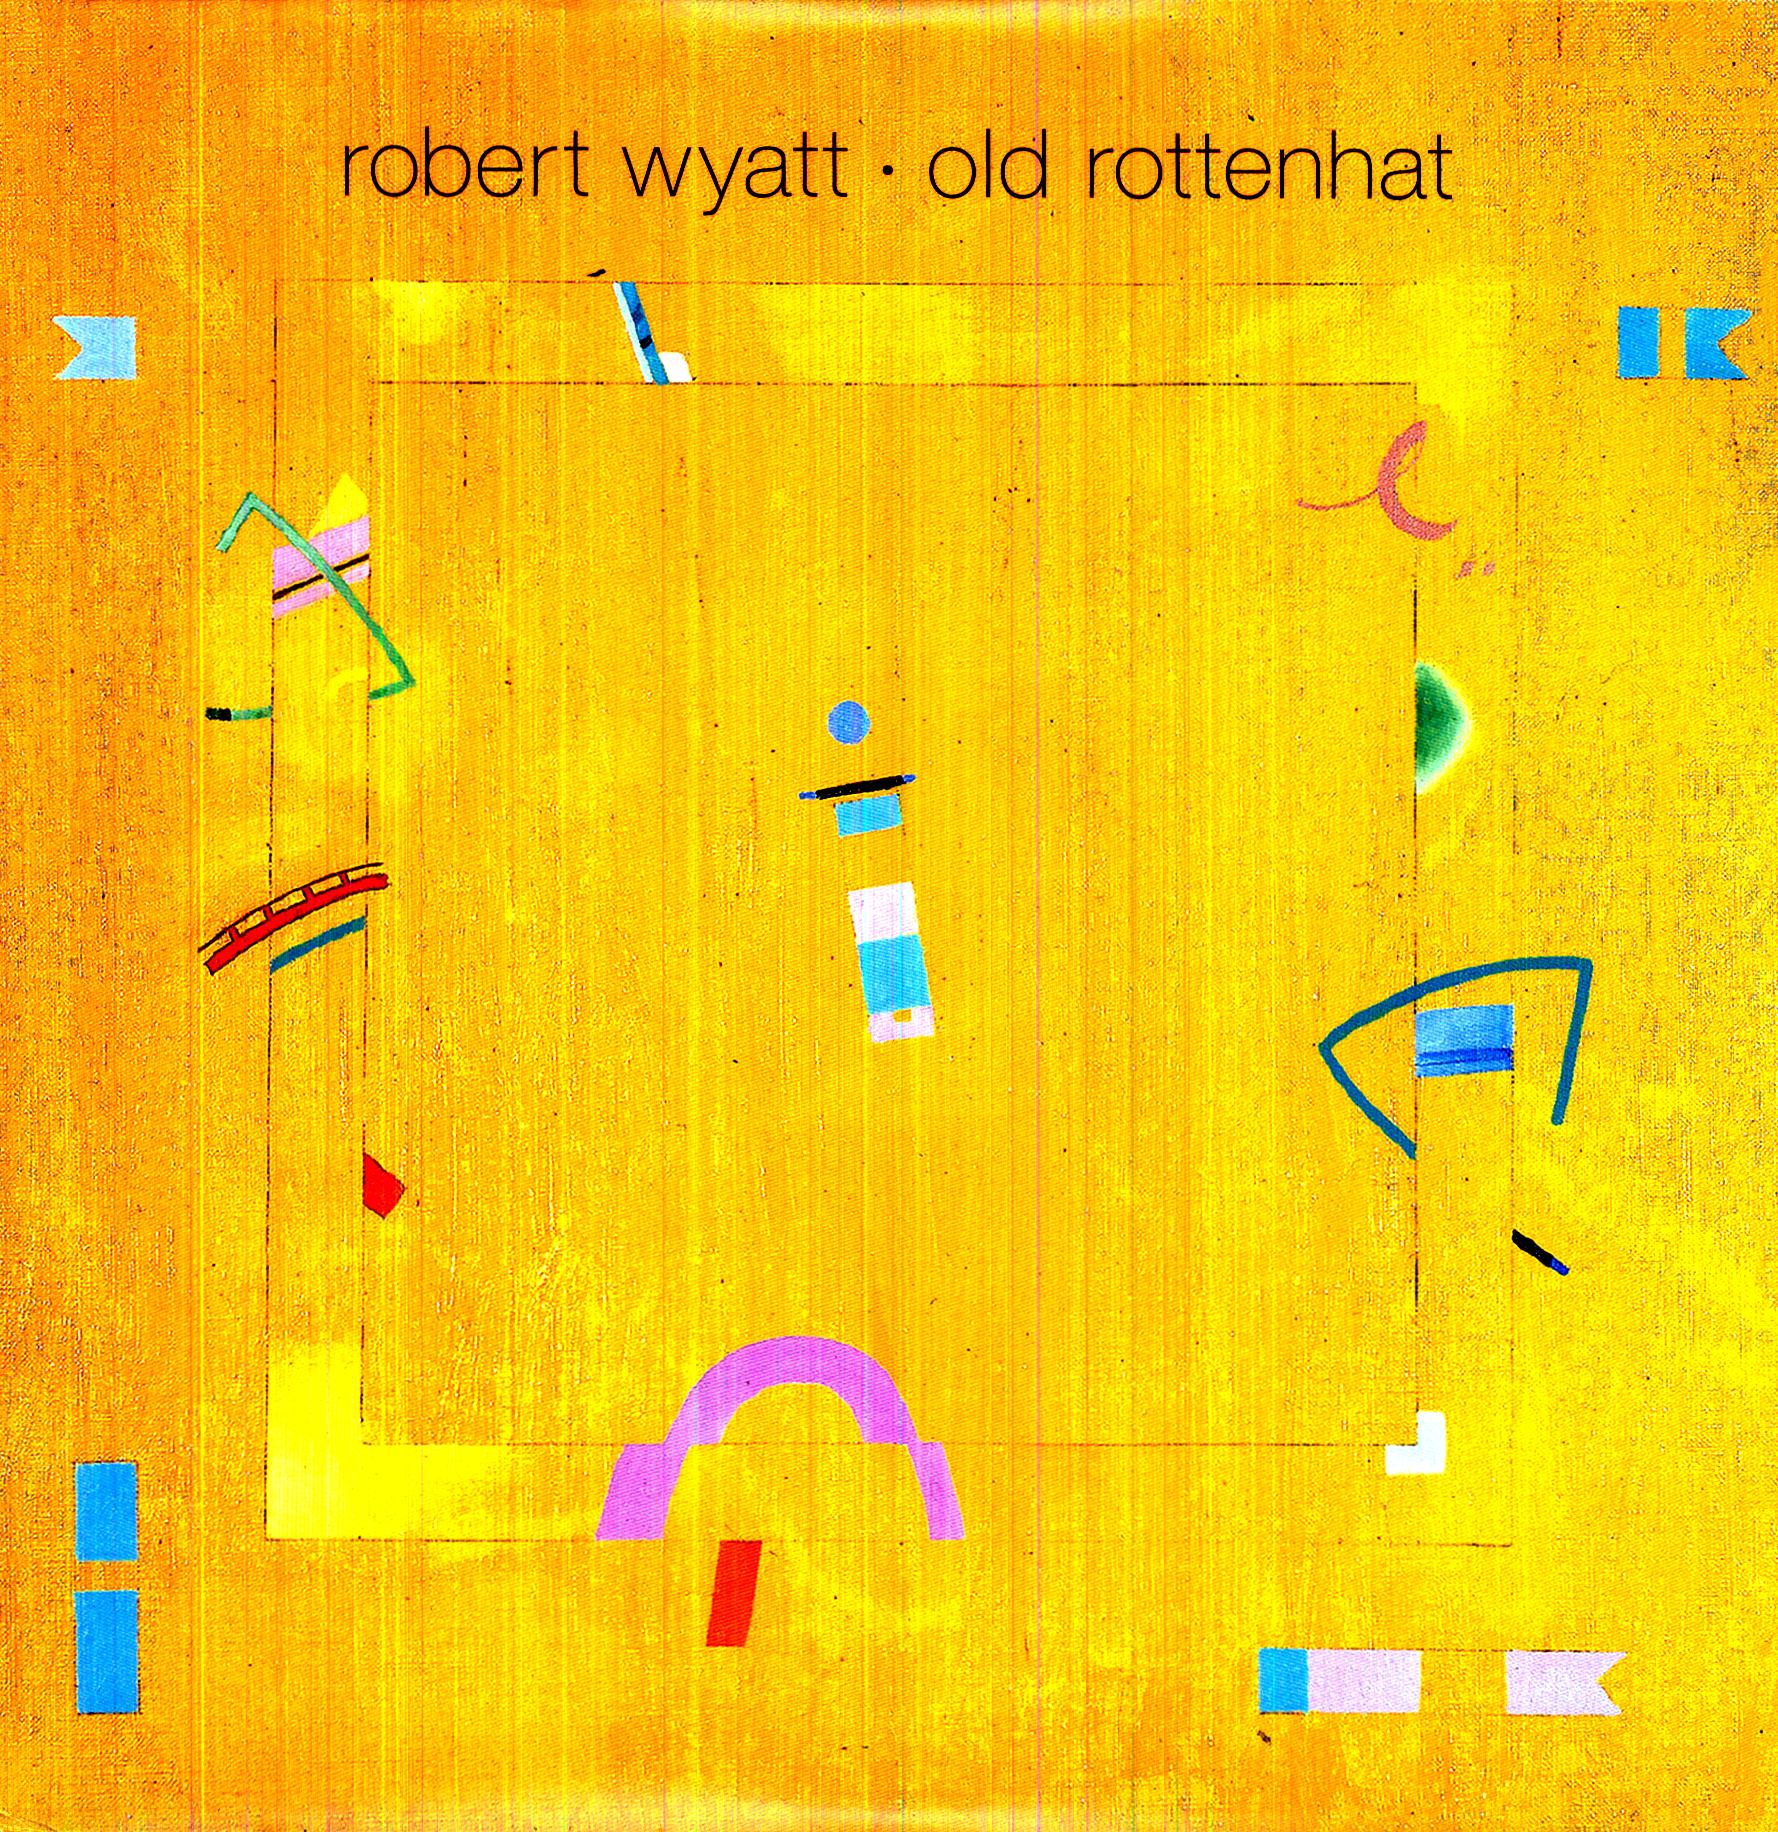 OLD ROTTENHAT